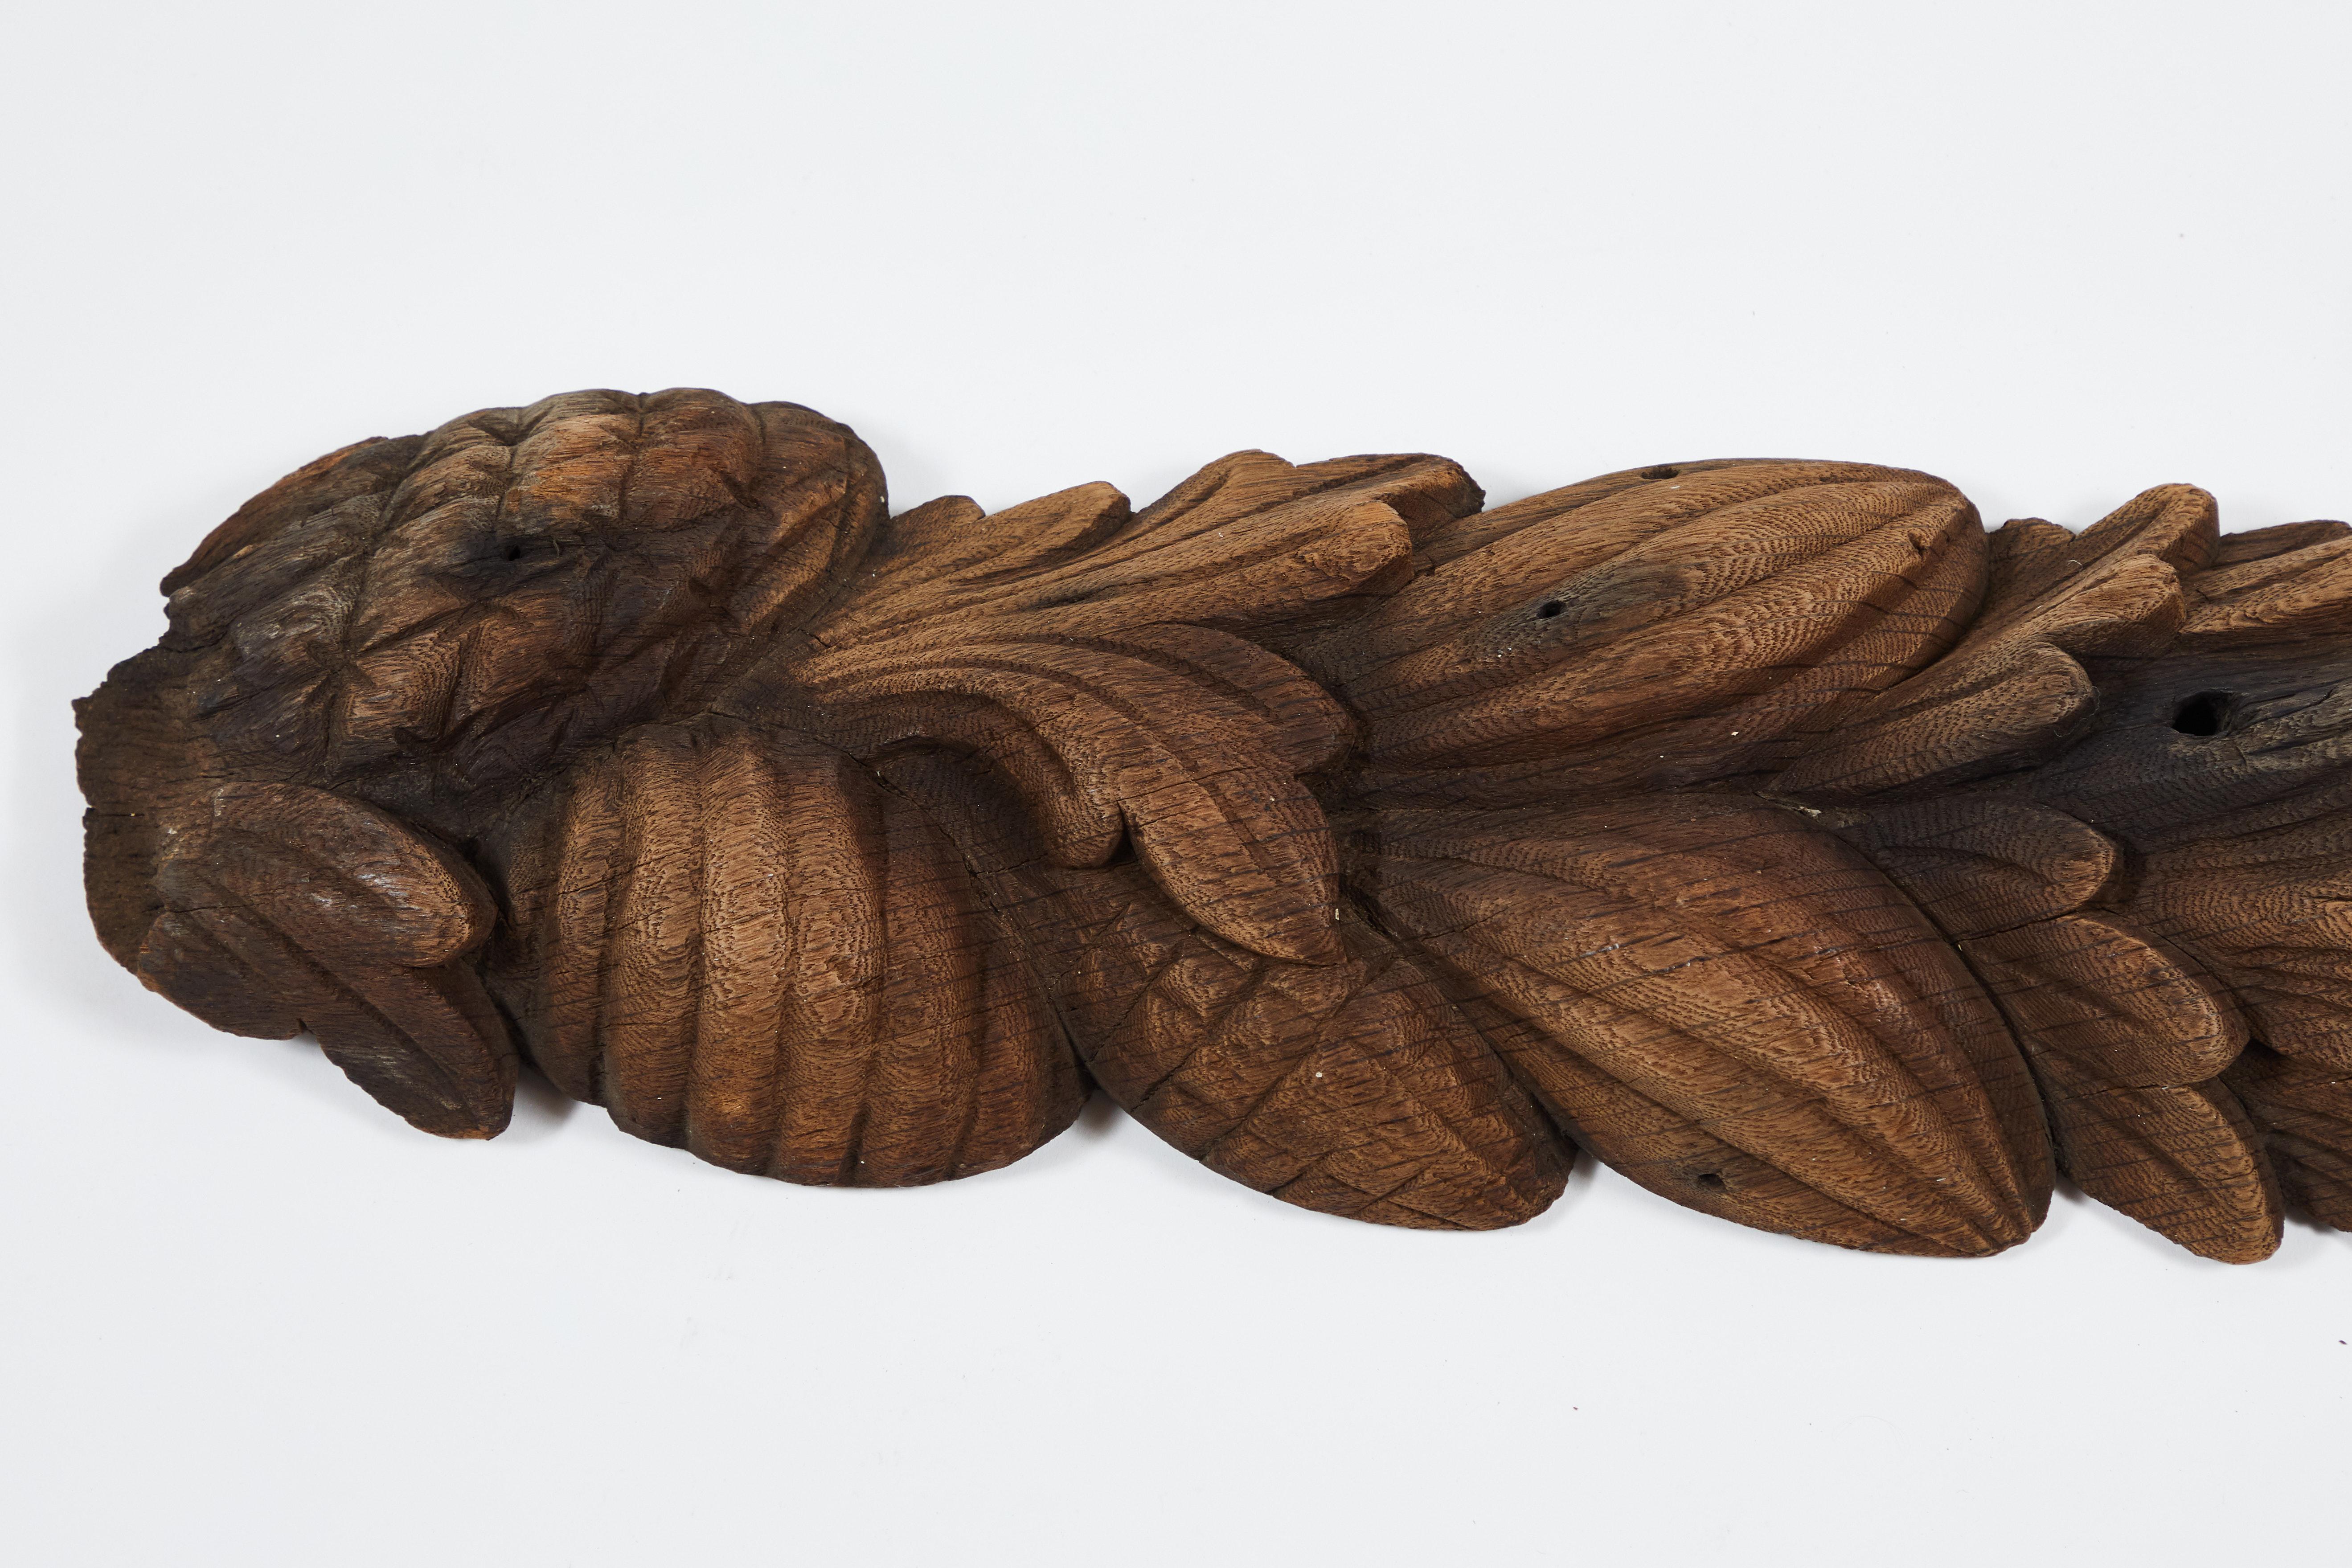 This found sculptural element was probably part of a large piece of furniture or an interior or exterior architectural decoration. With weathering to its hand carved fruits, vegetables, and leaves, It does show evidence of its time in use outdoors.